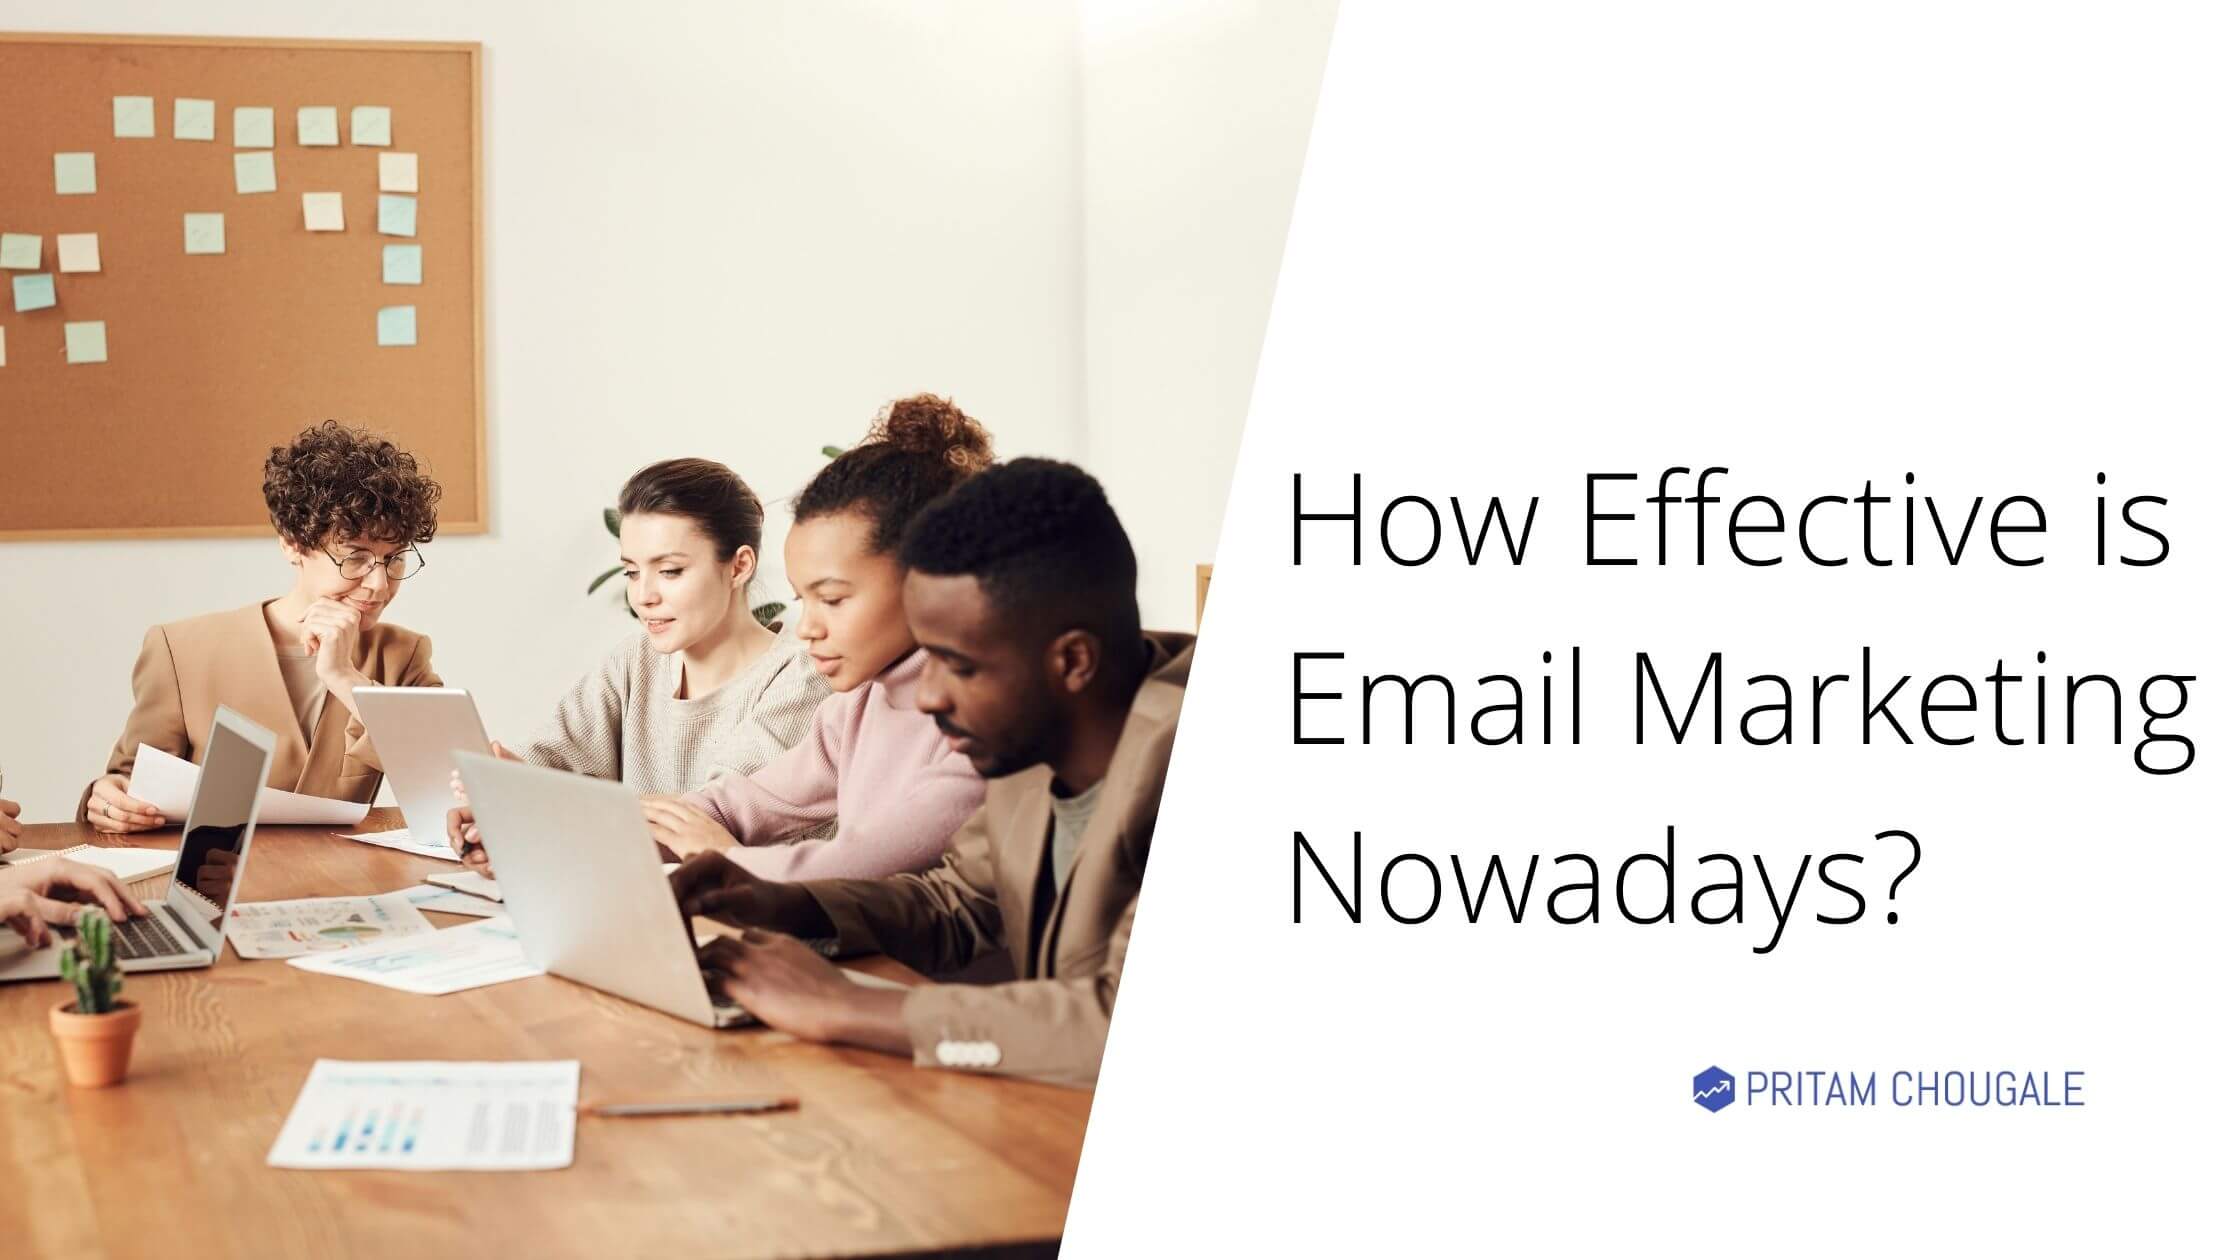 How Effective is Email Marketing Nowadays?